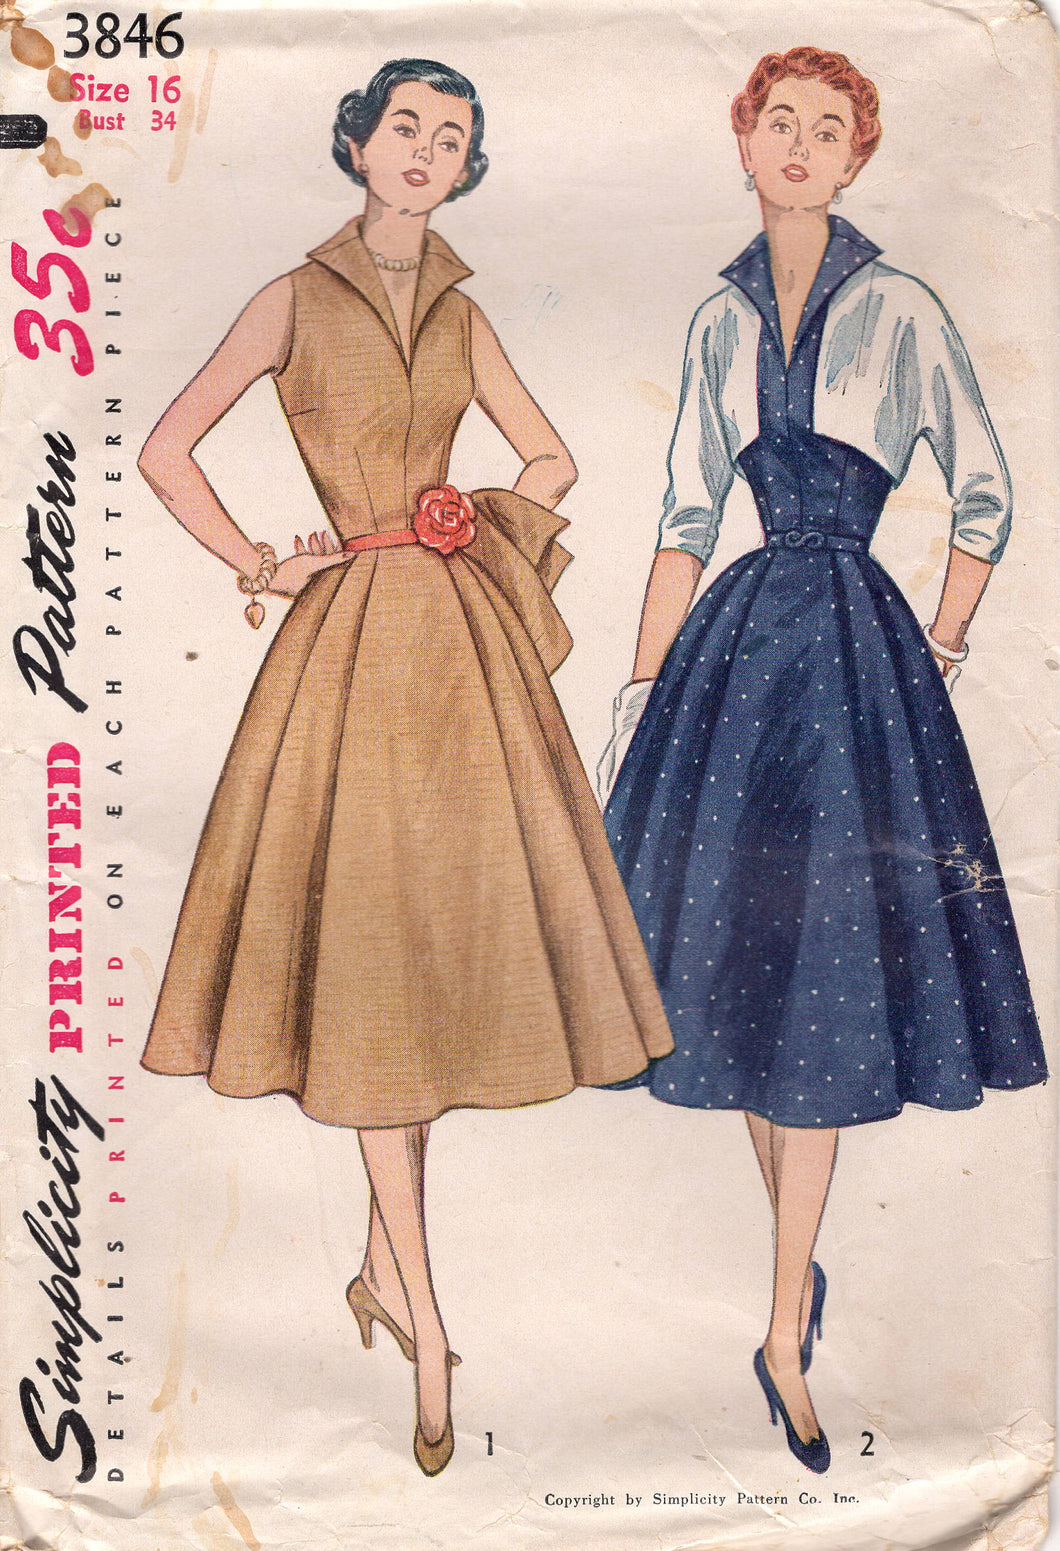 1950's Simplicity One Piece Dress Pattern with Large Collar and Bolero - Bust 34